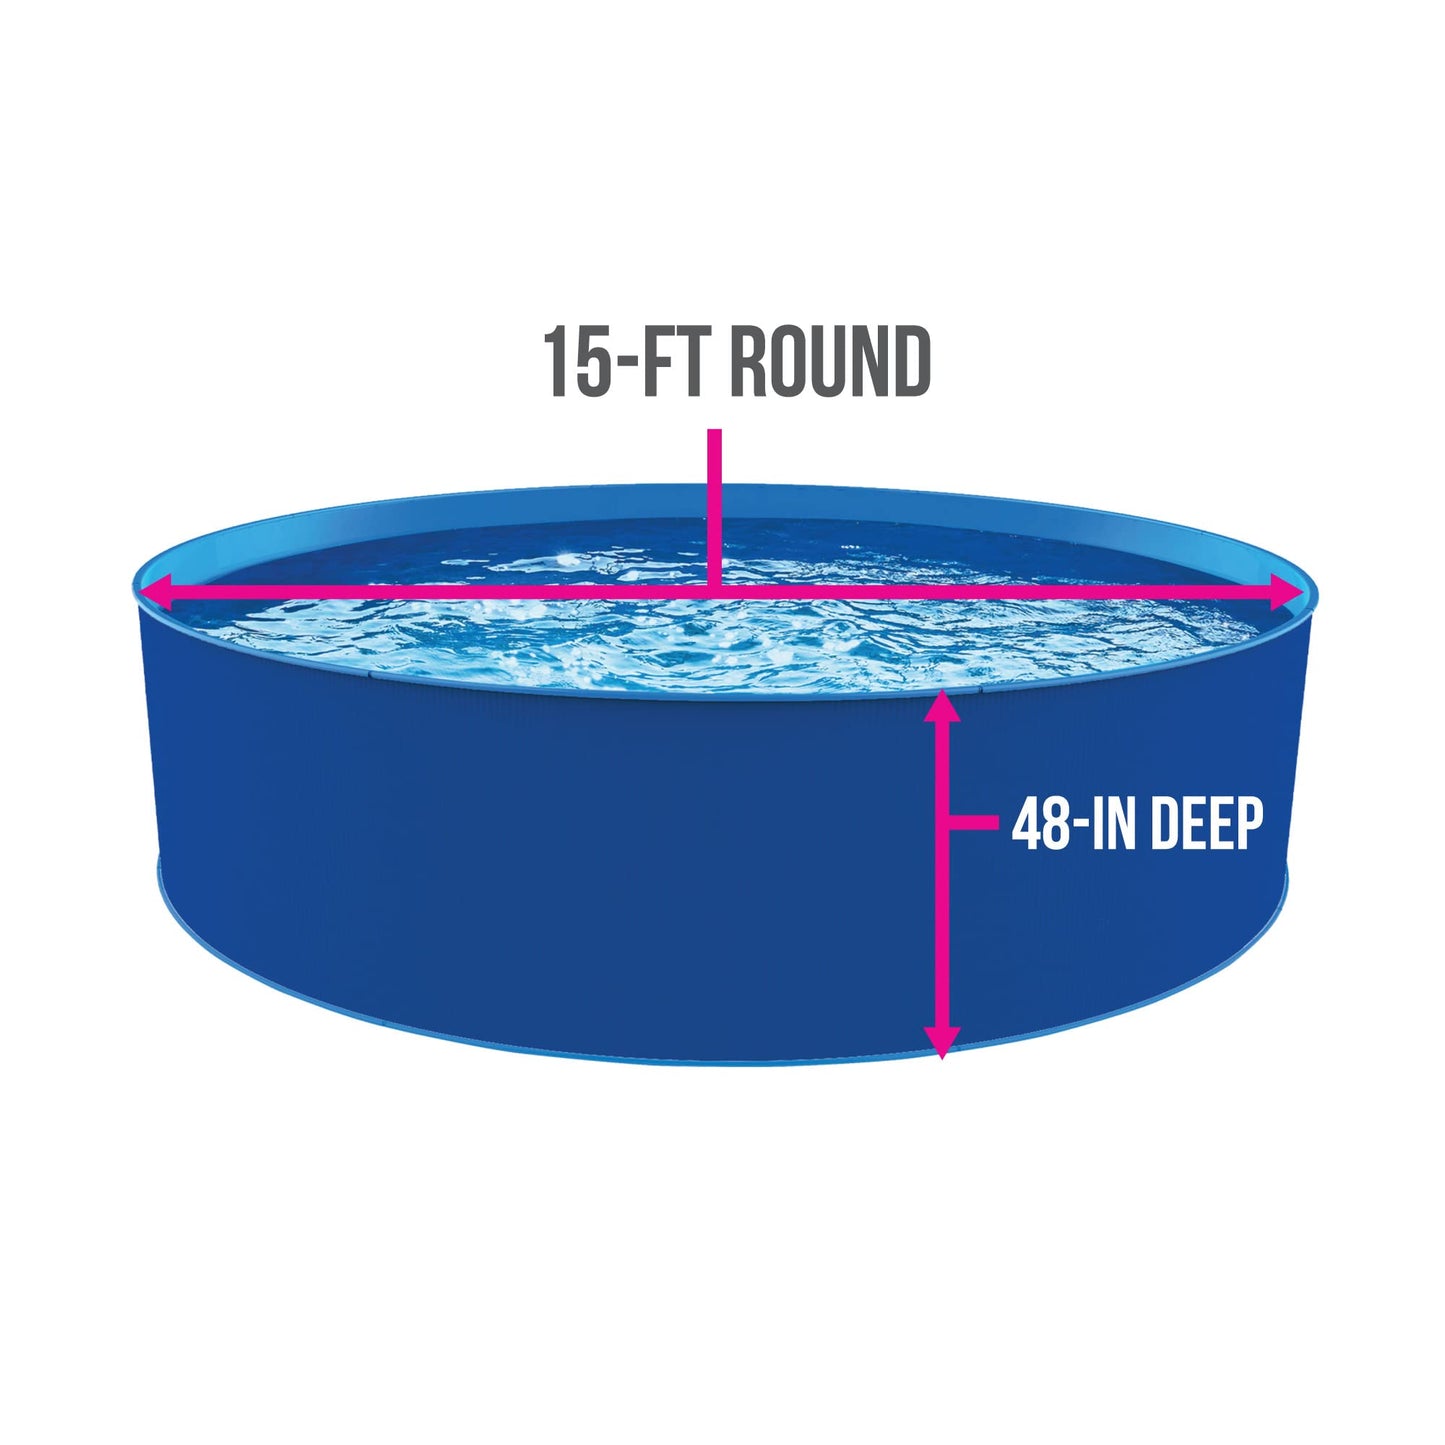 Blue Wave Cobalt Steel Wall Pool Package - 15-ft Round 48-in Deep 15-ft Round x 48-in Deep